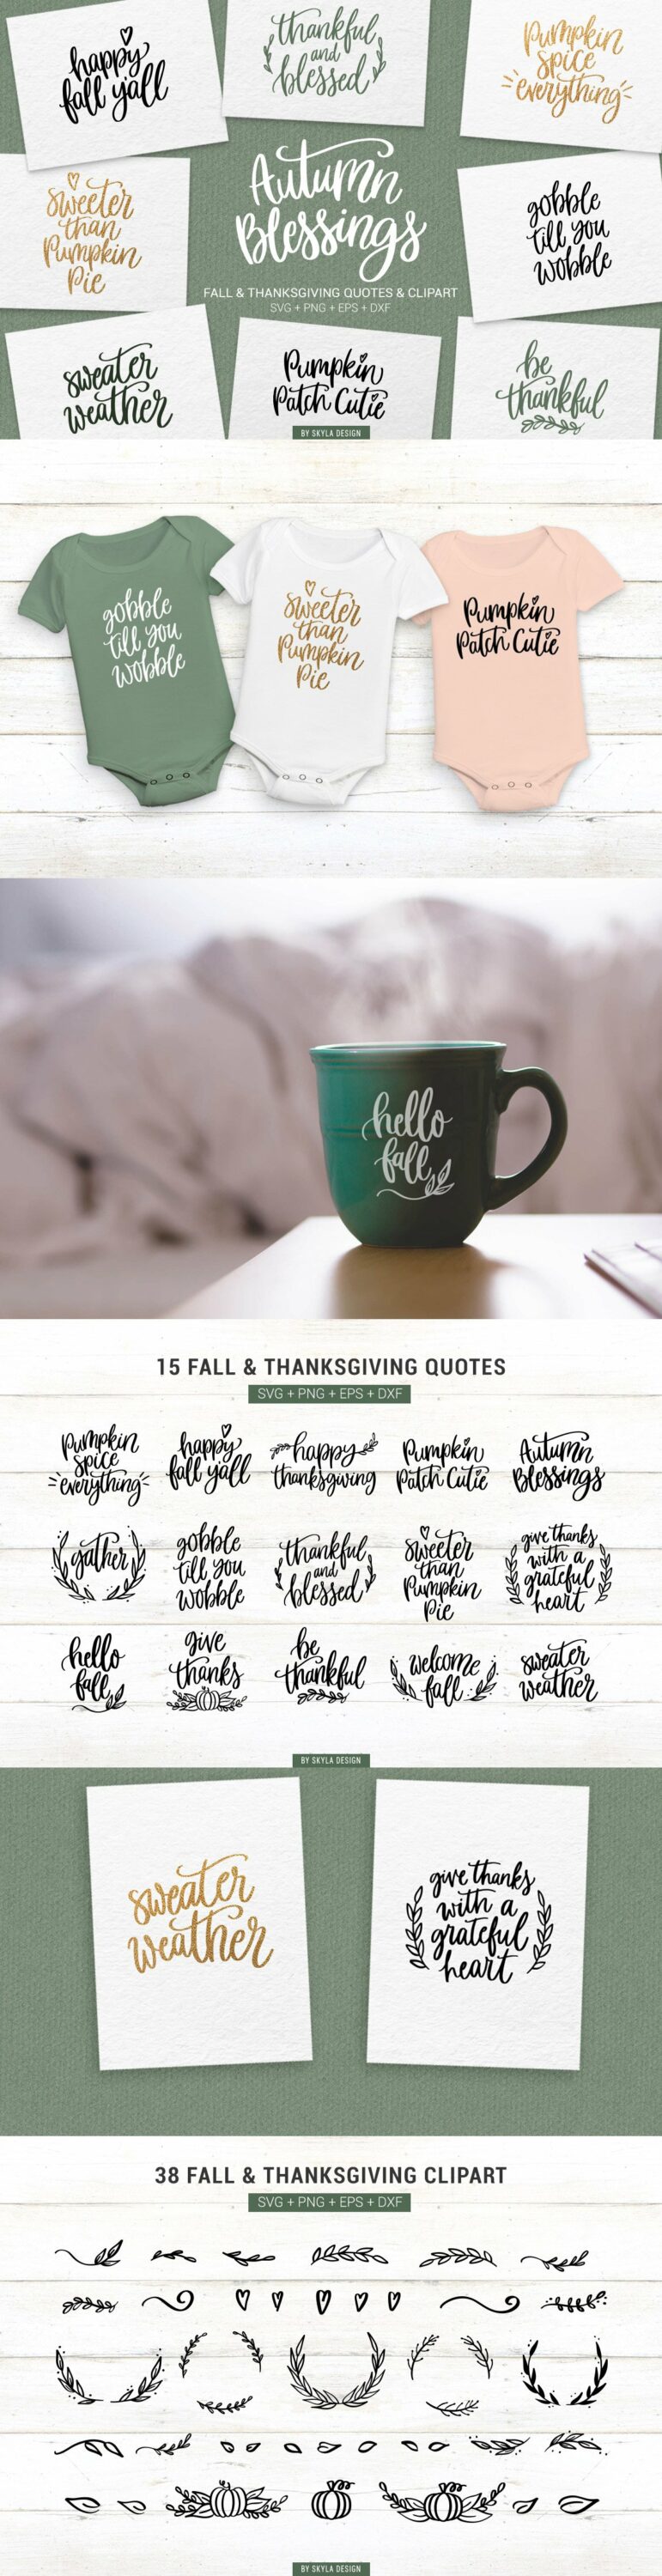 Fall Thanksgiving SVG Quotes Clipart.